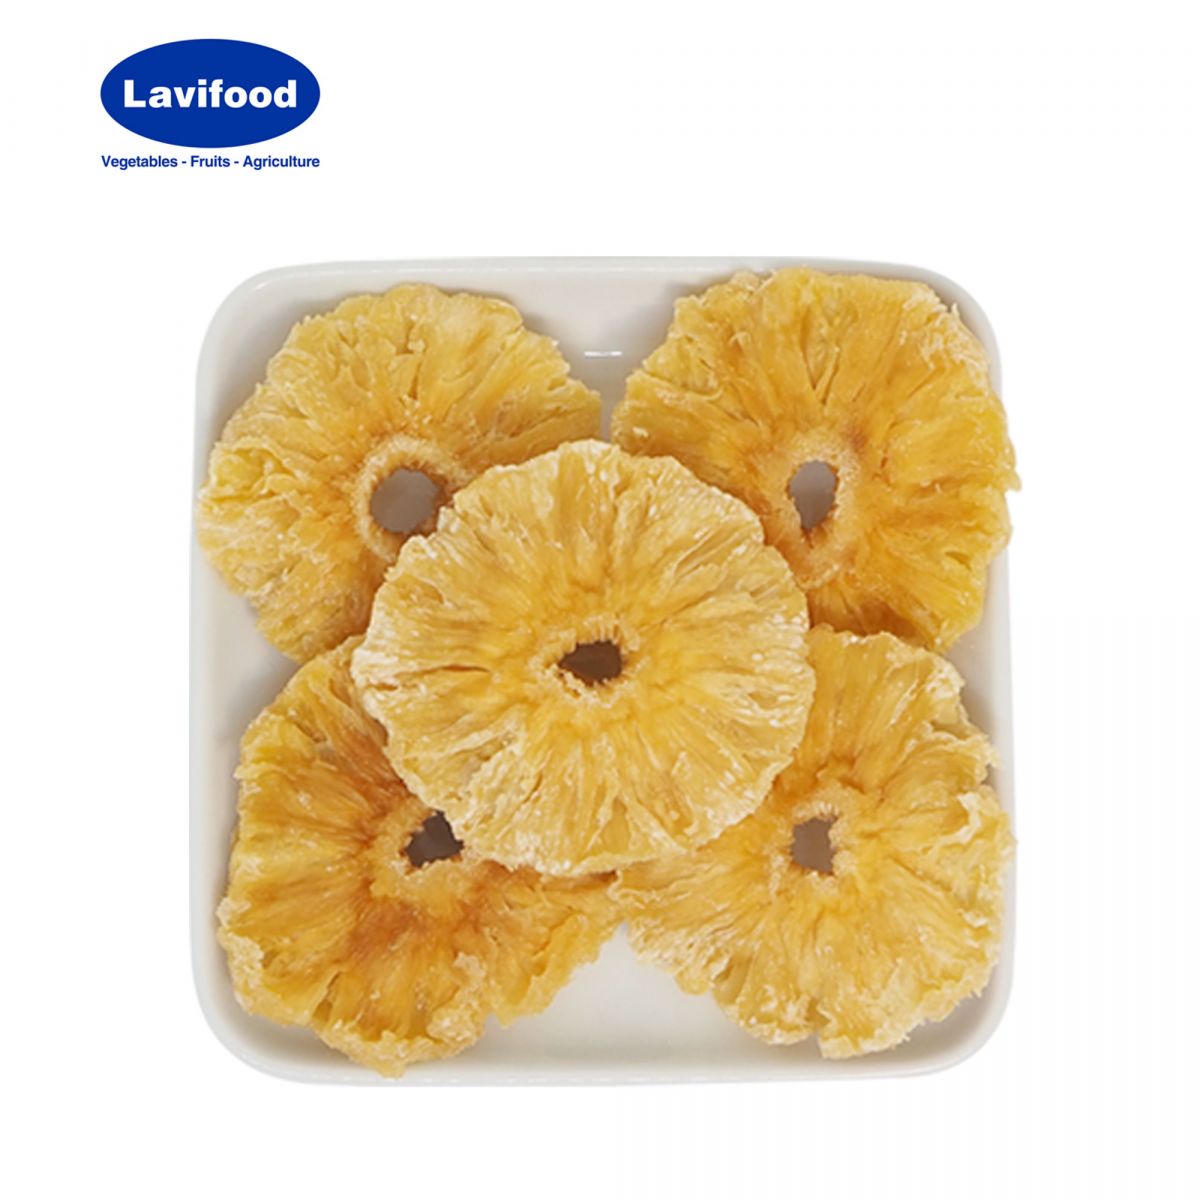 https://www.lavifood.com/en/products/dried-fruit-vegetables/dried-pinaeapple